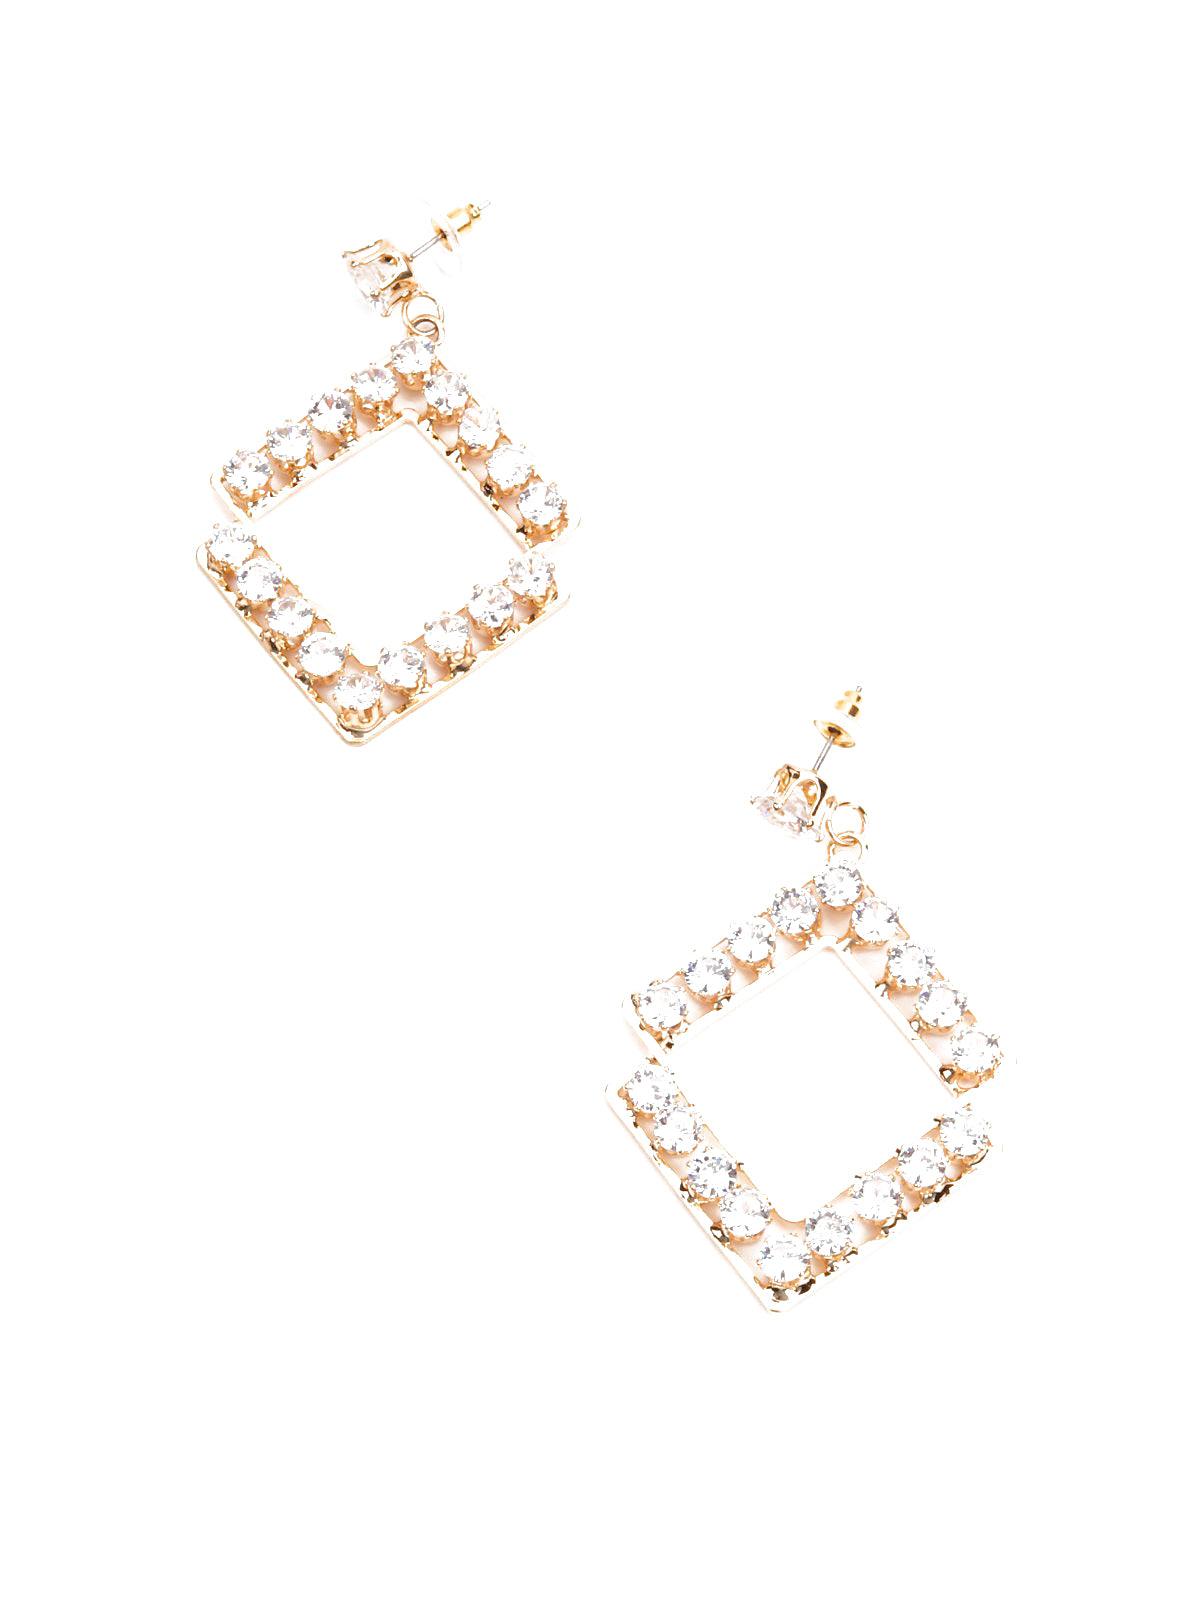 Women's Classy Square Earring With Stones - Odette